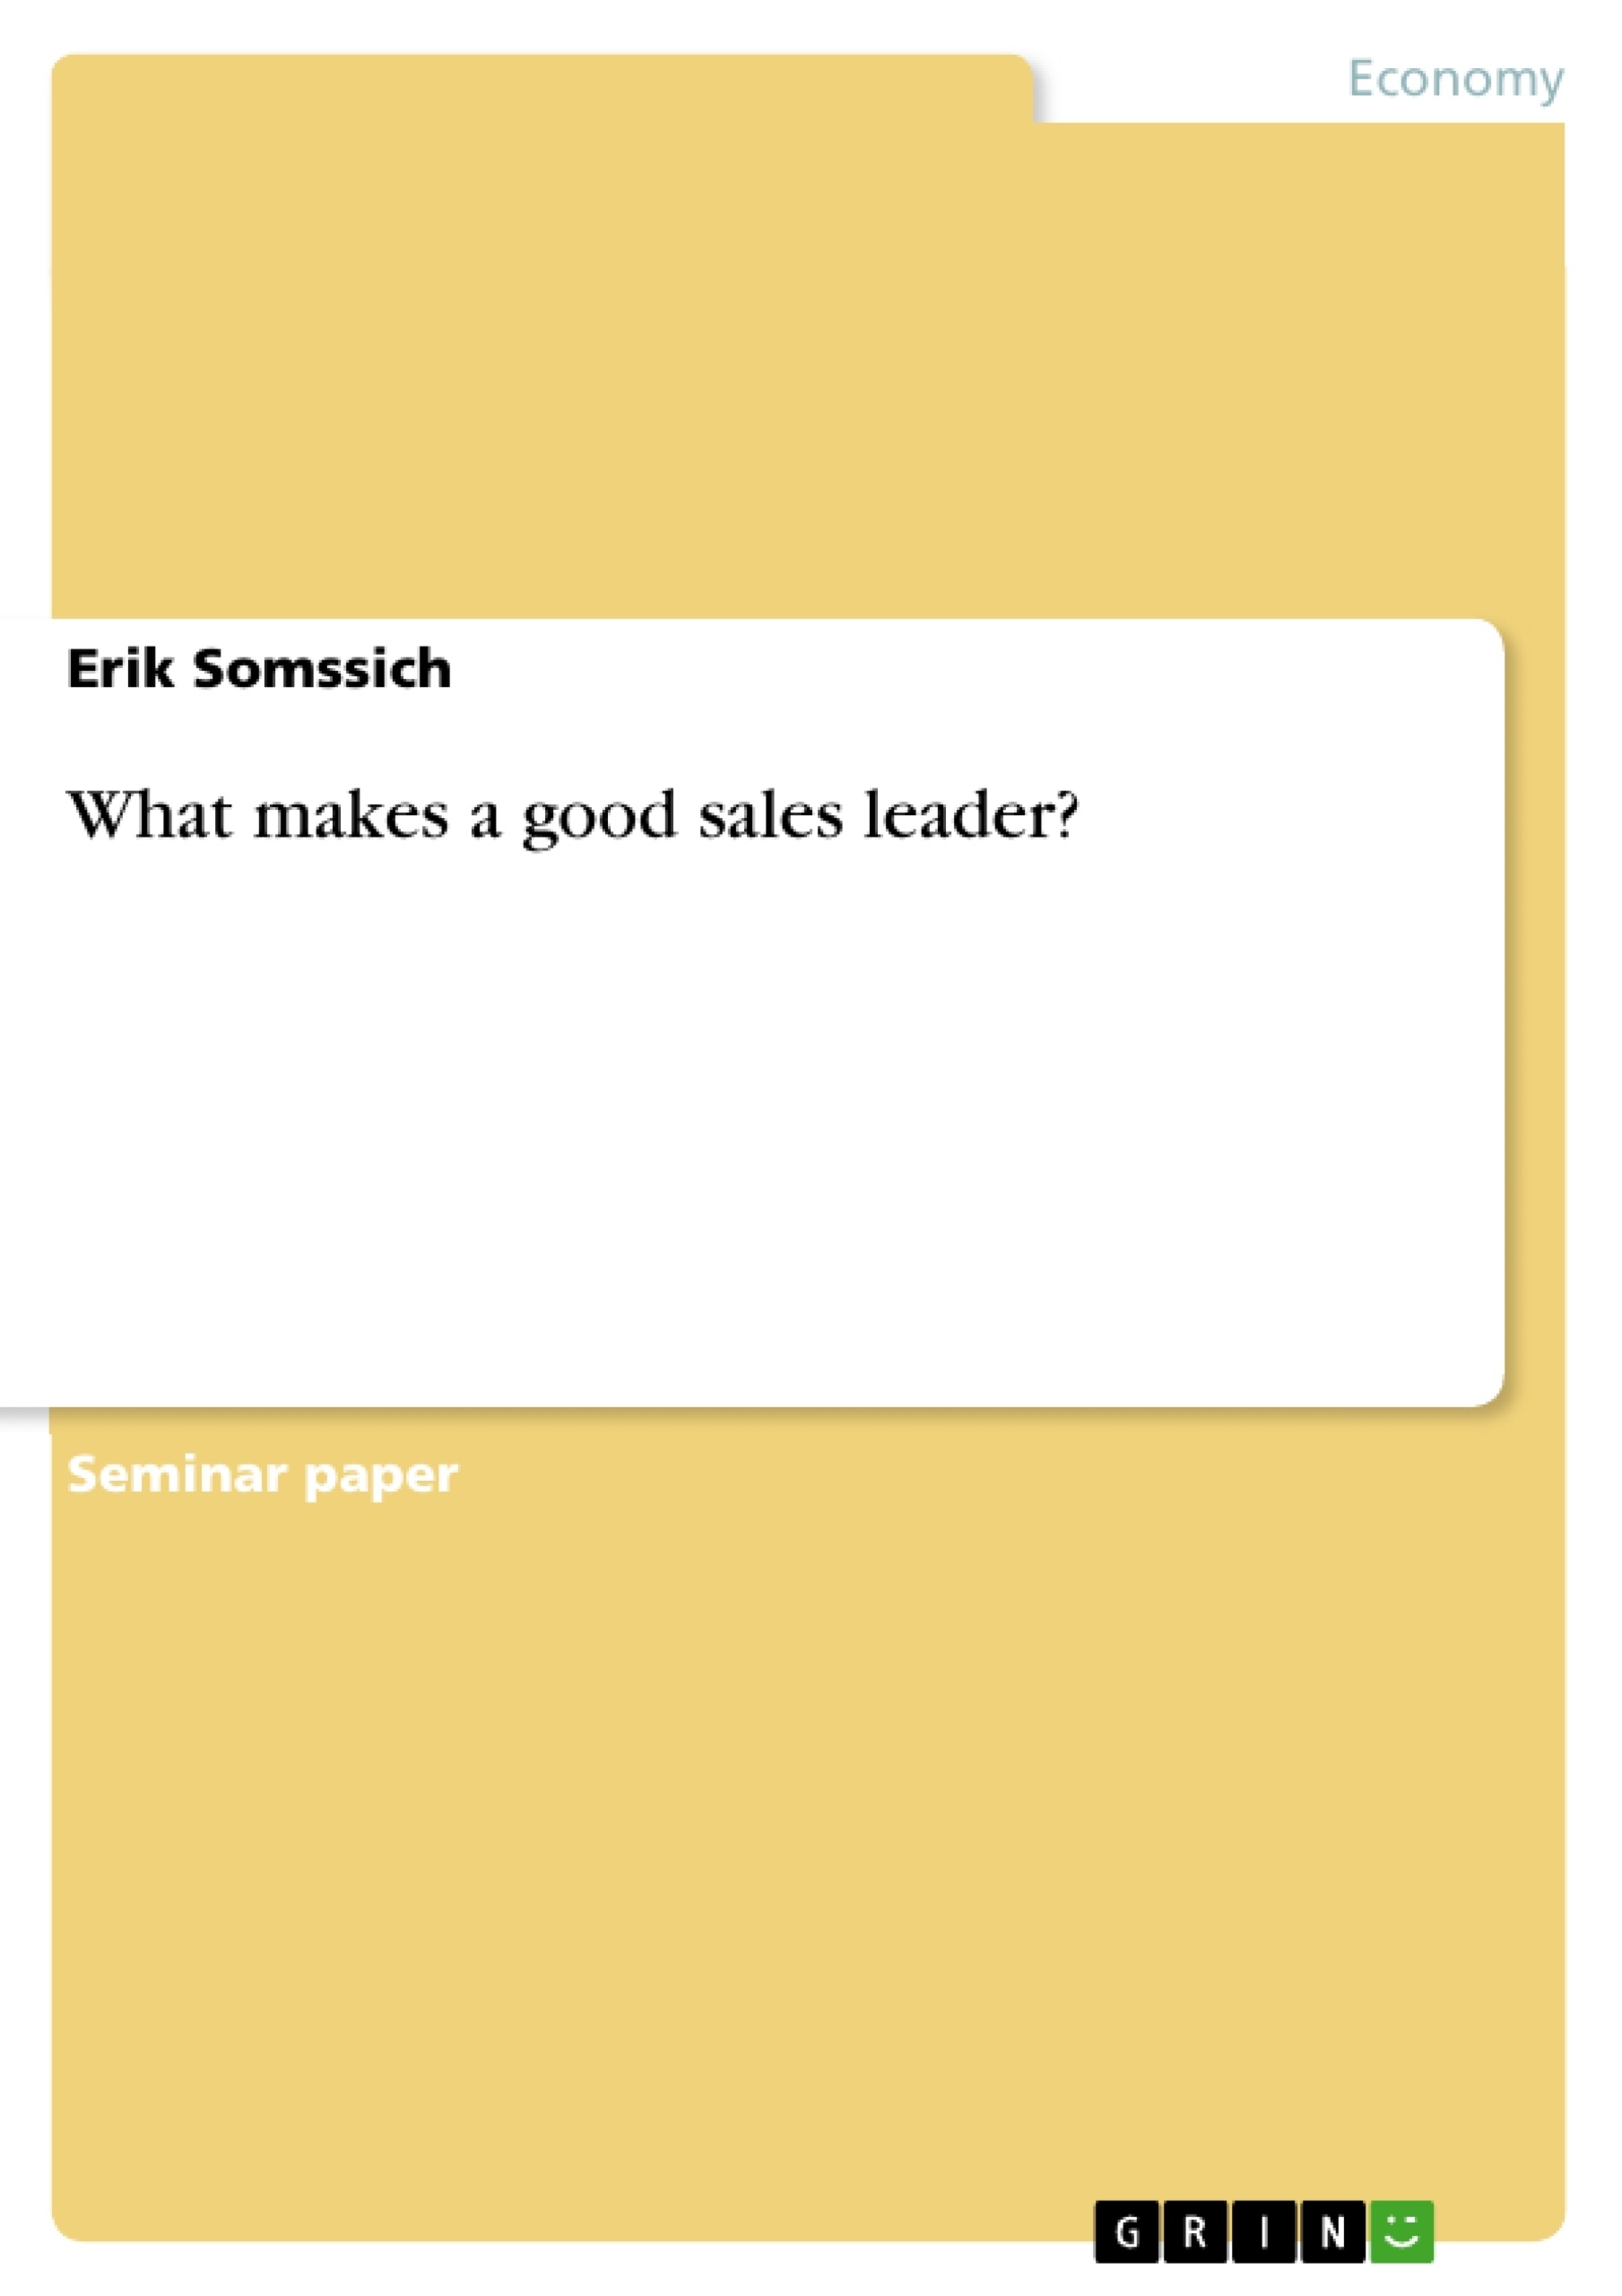 Title: What makes a good sales leader?